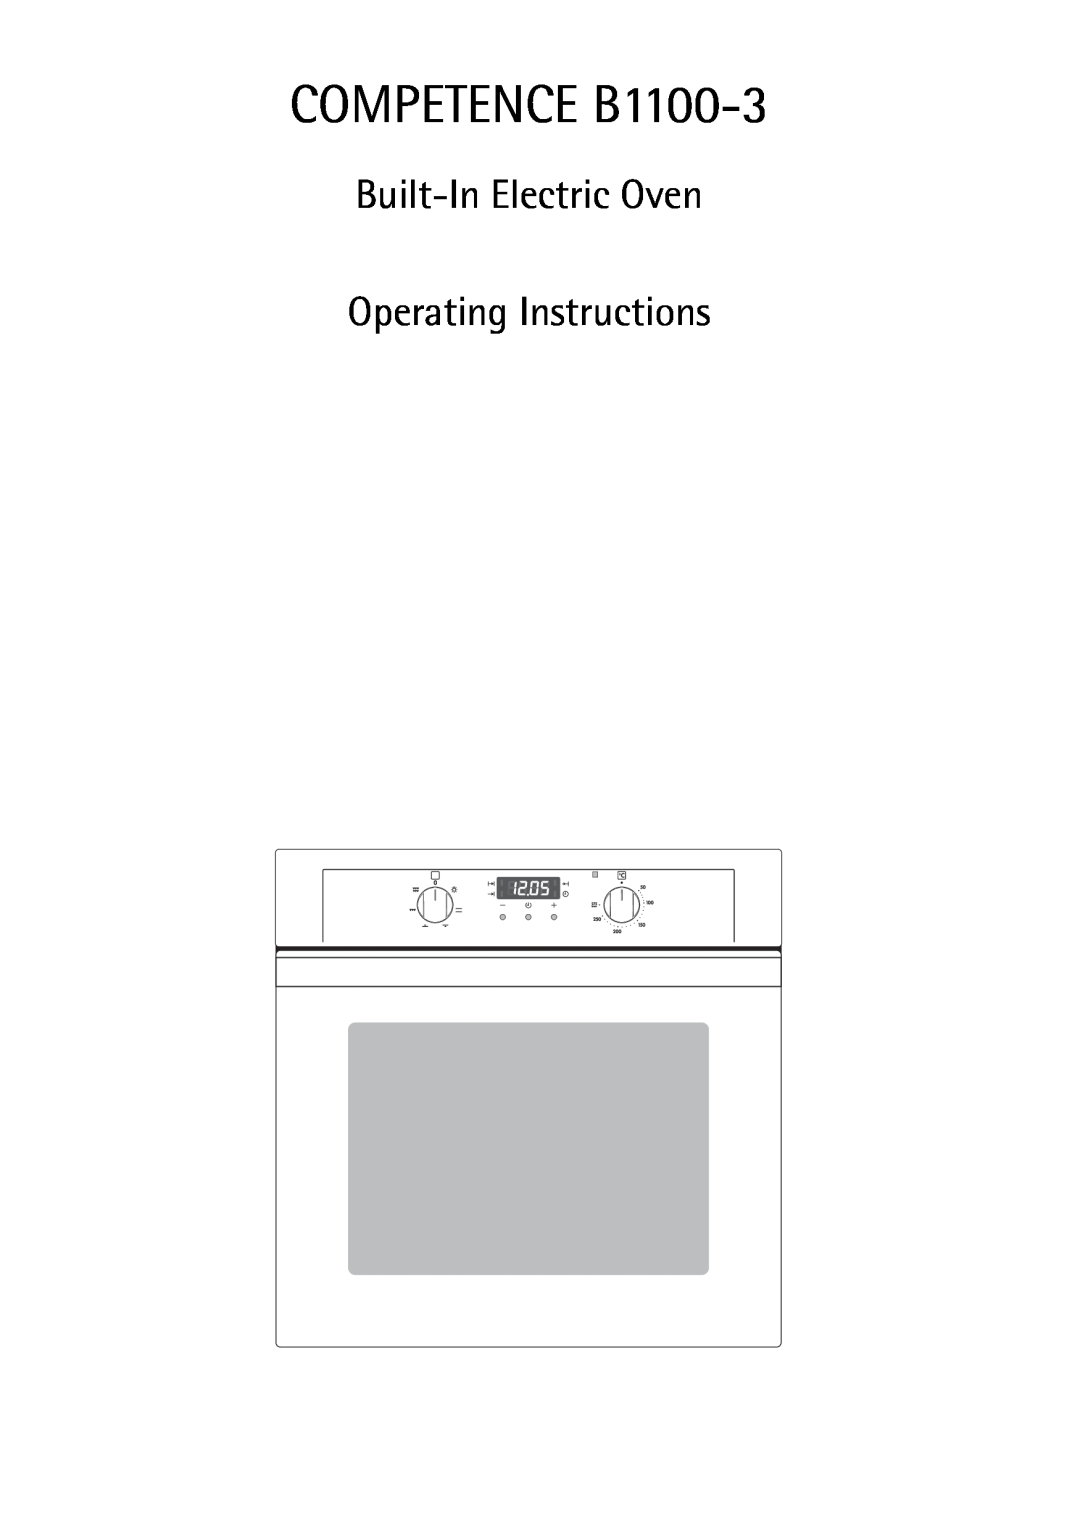 Electrolux manual COMPETENCE B1100-3, Built-In Electric Oven Operating Instructions 